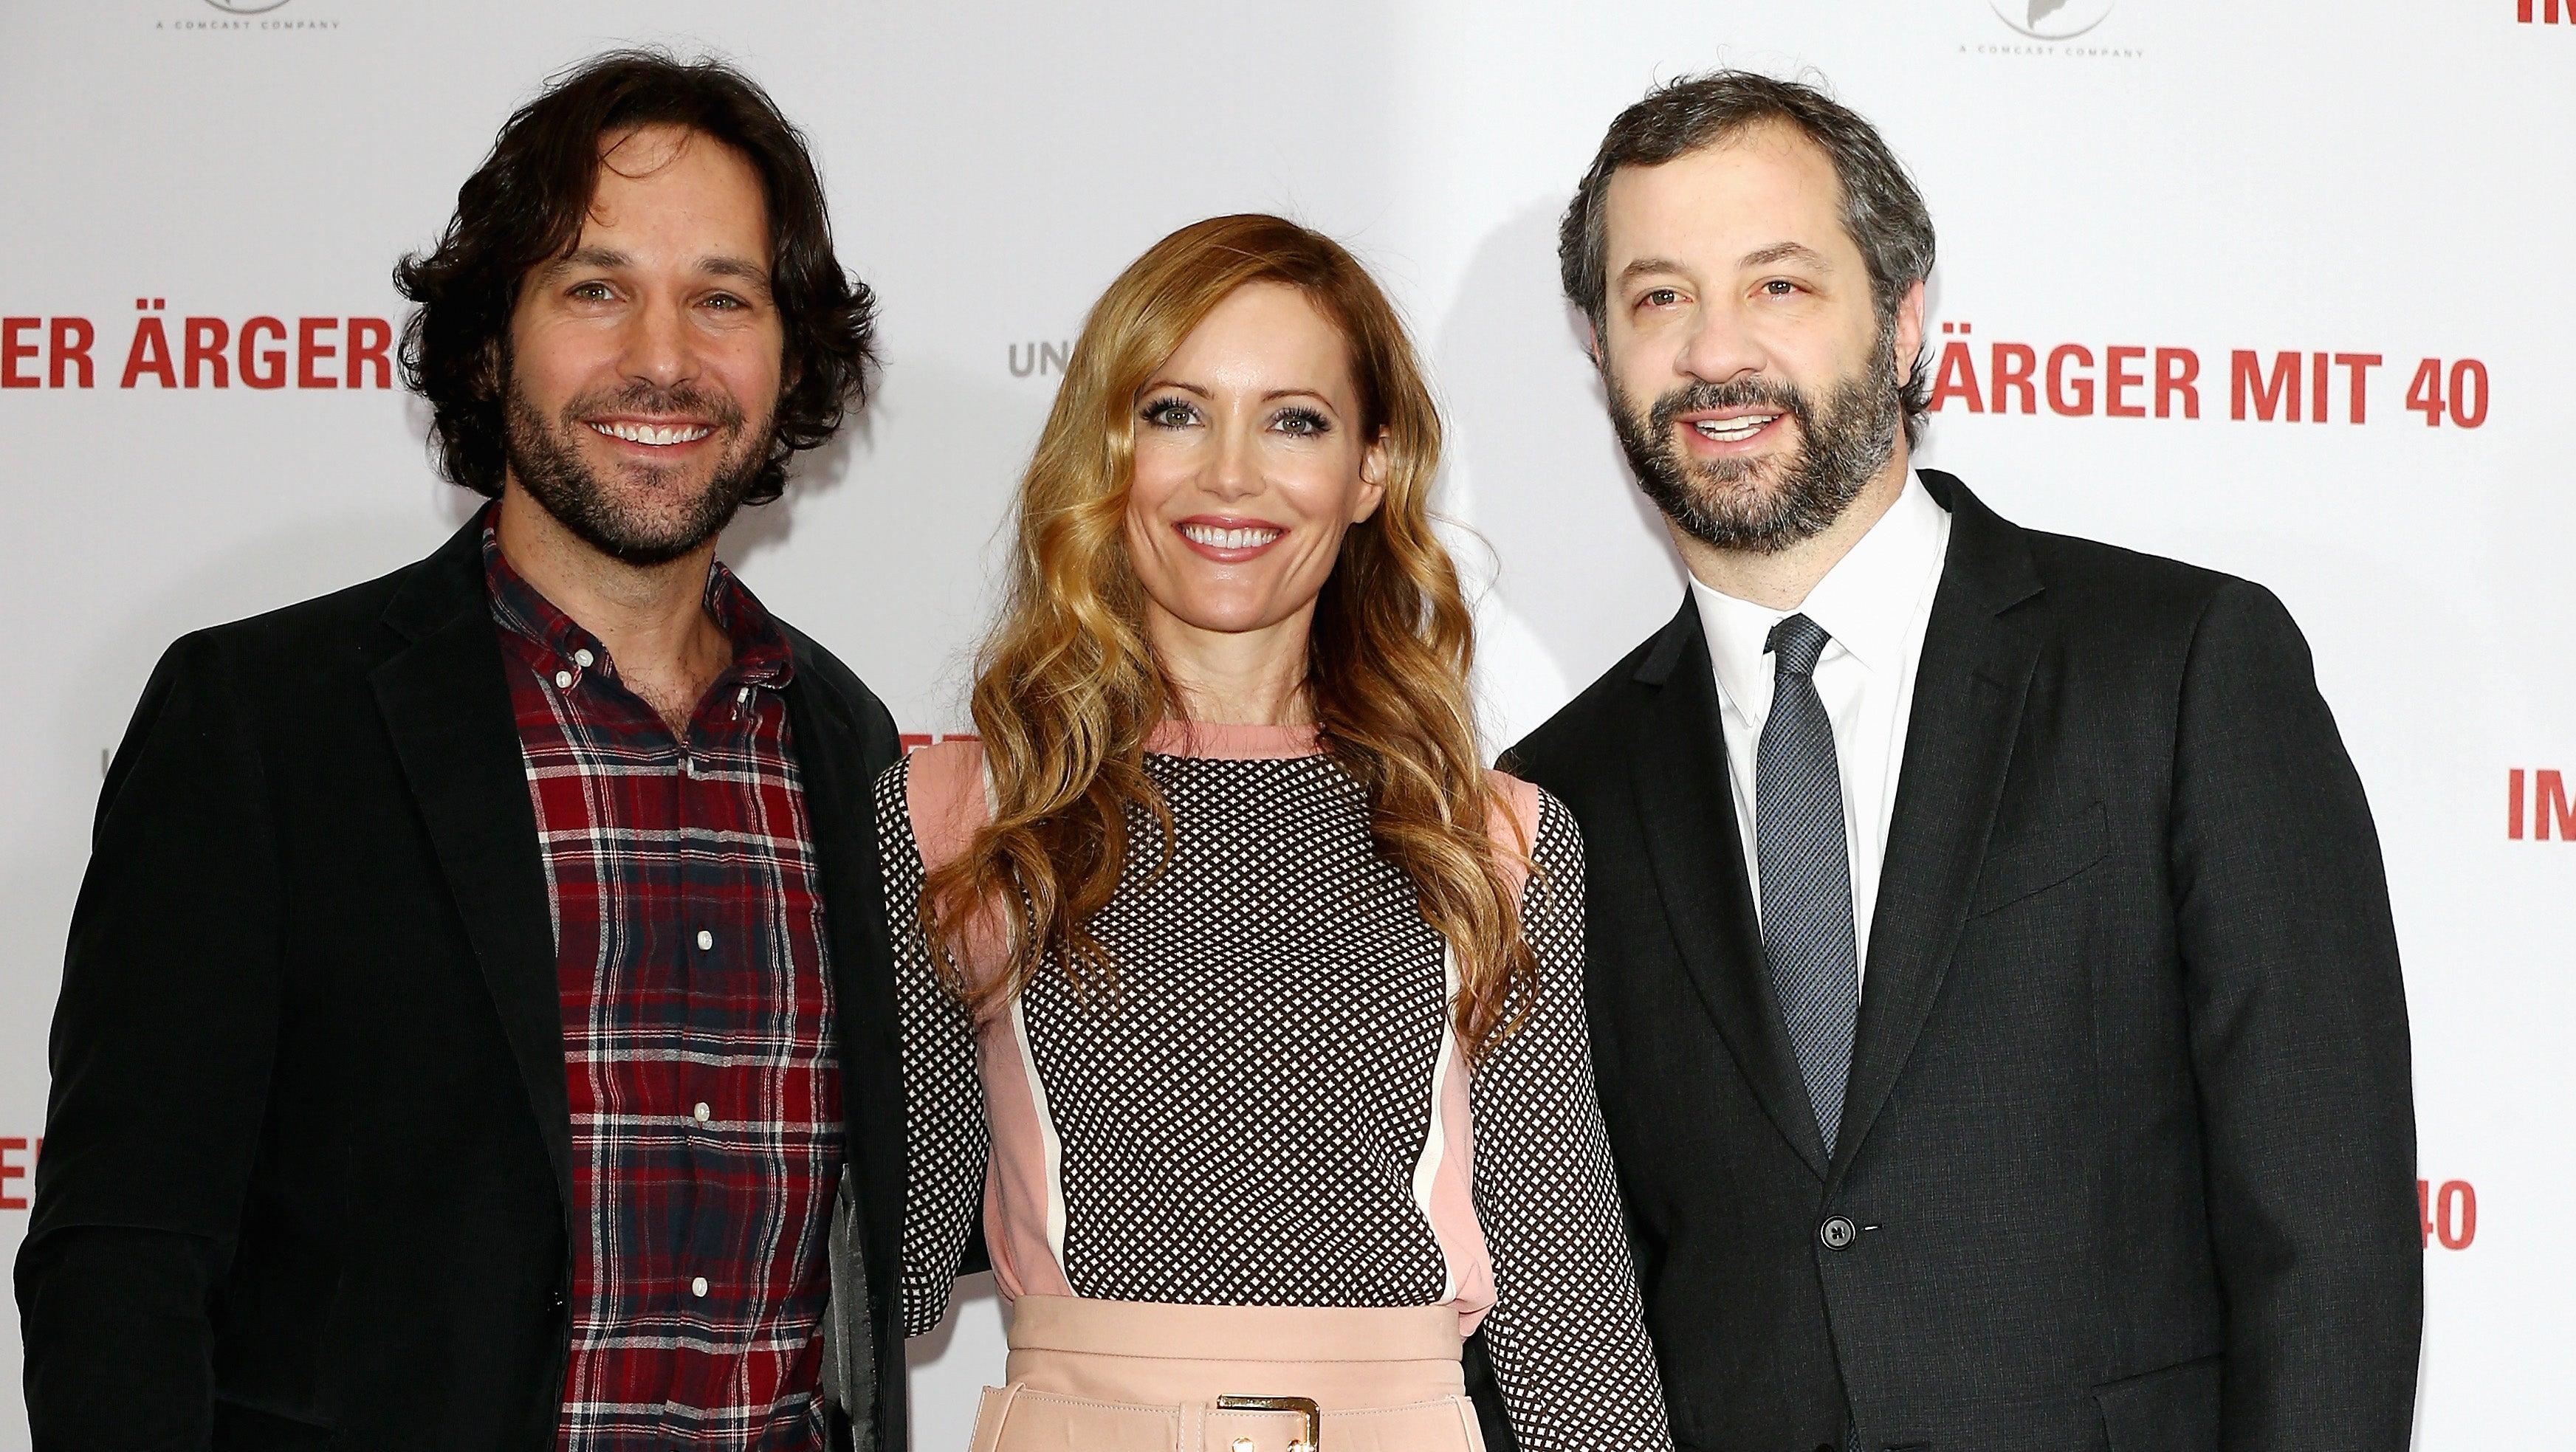 Judd Apatow says This Is 50 might be his next film